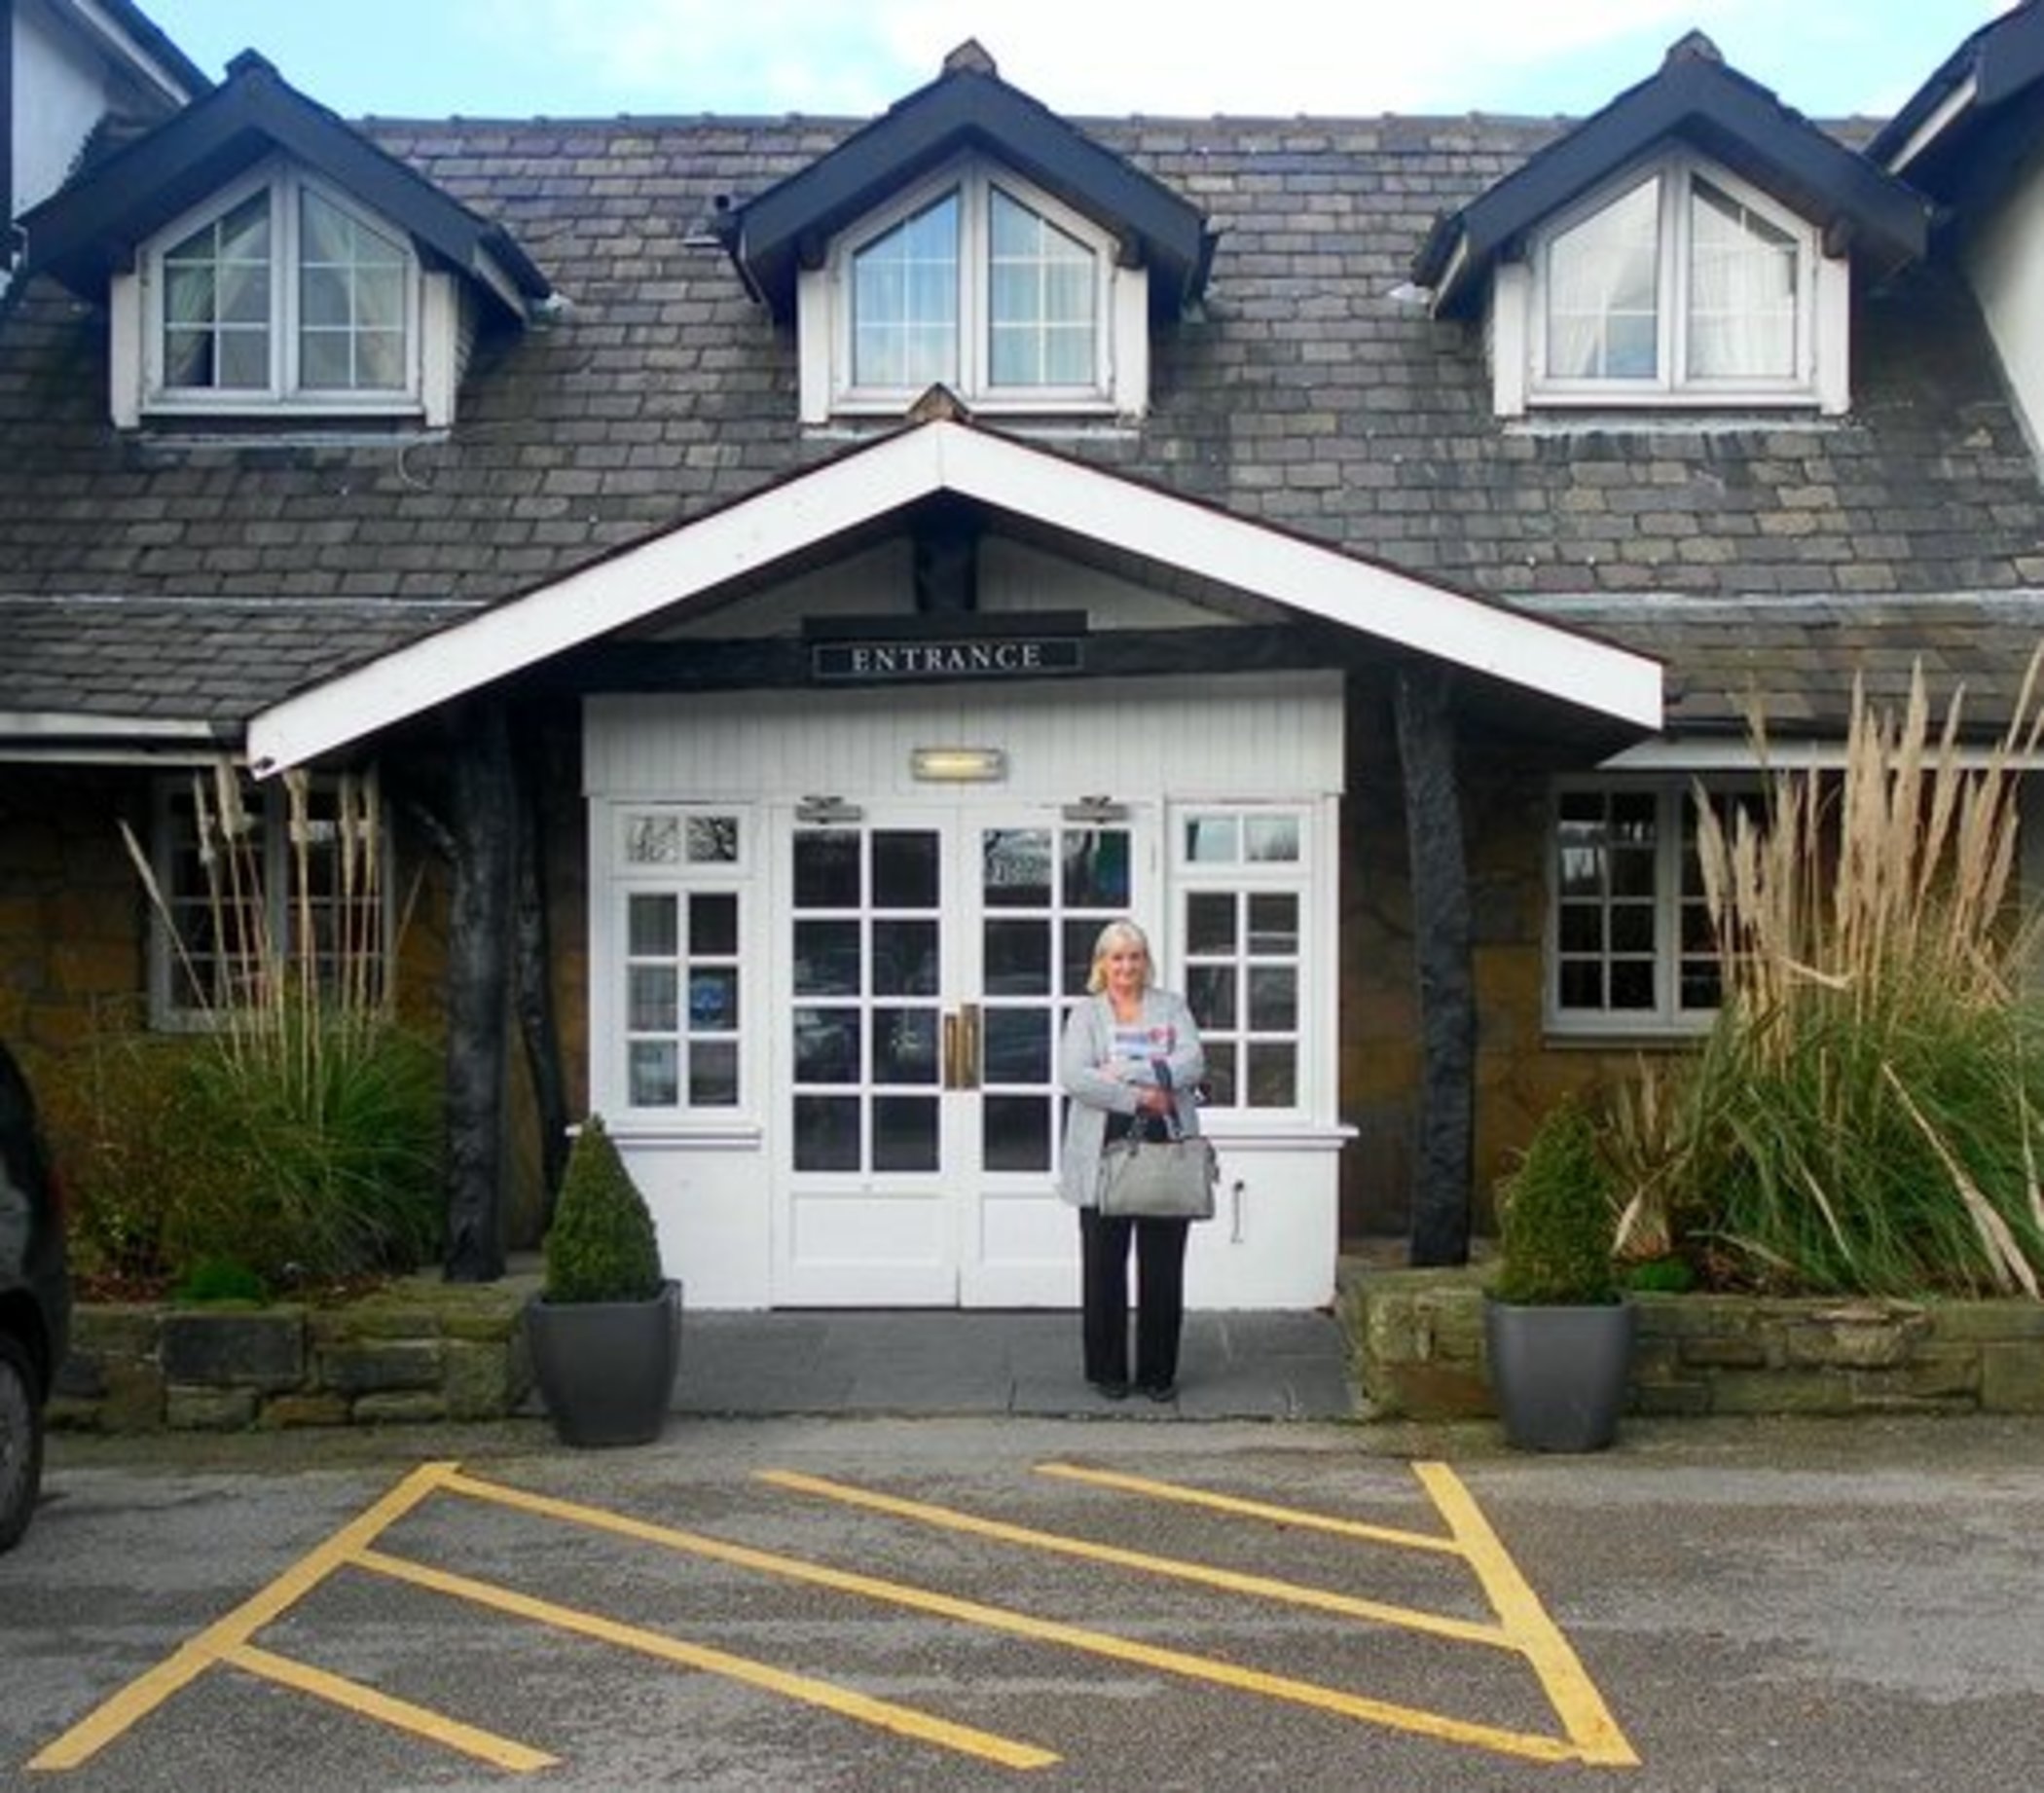 Macdonald Tickled Trout Hotel image